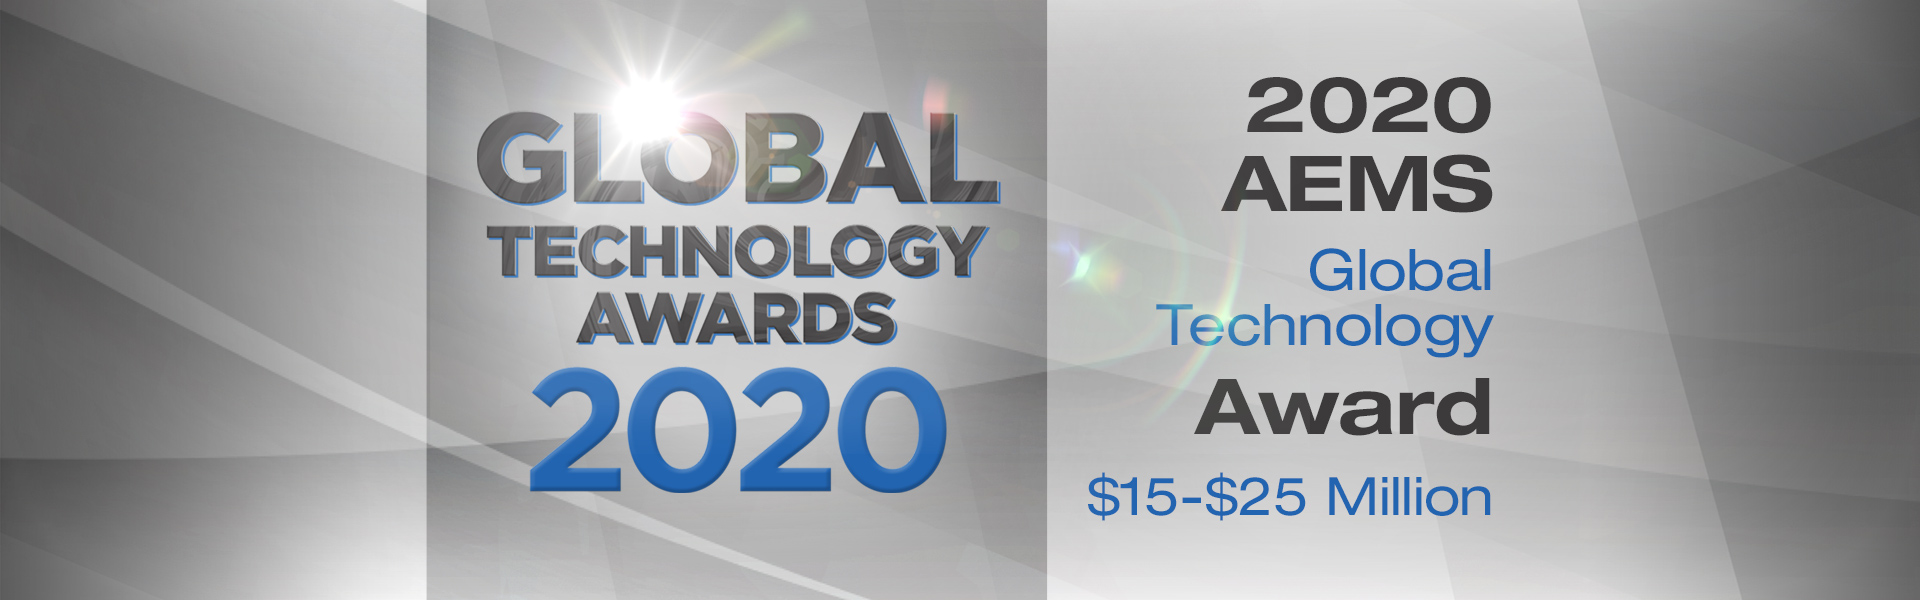 2020 GLOBAL Technology Award for Contract Services